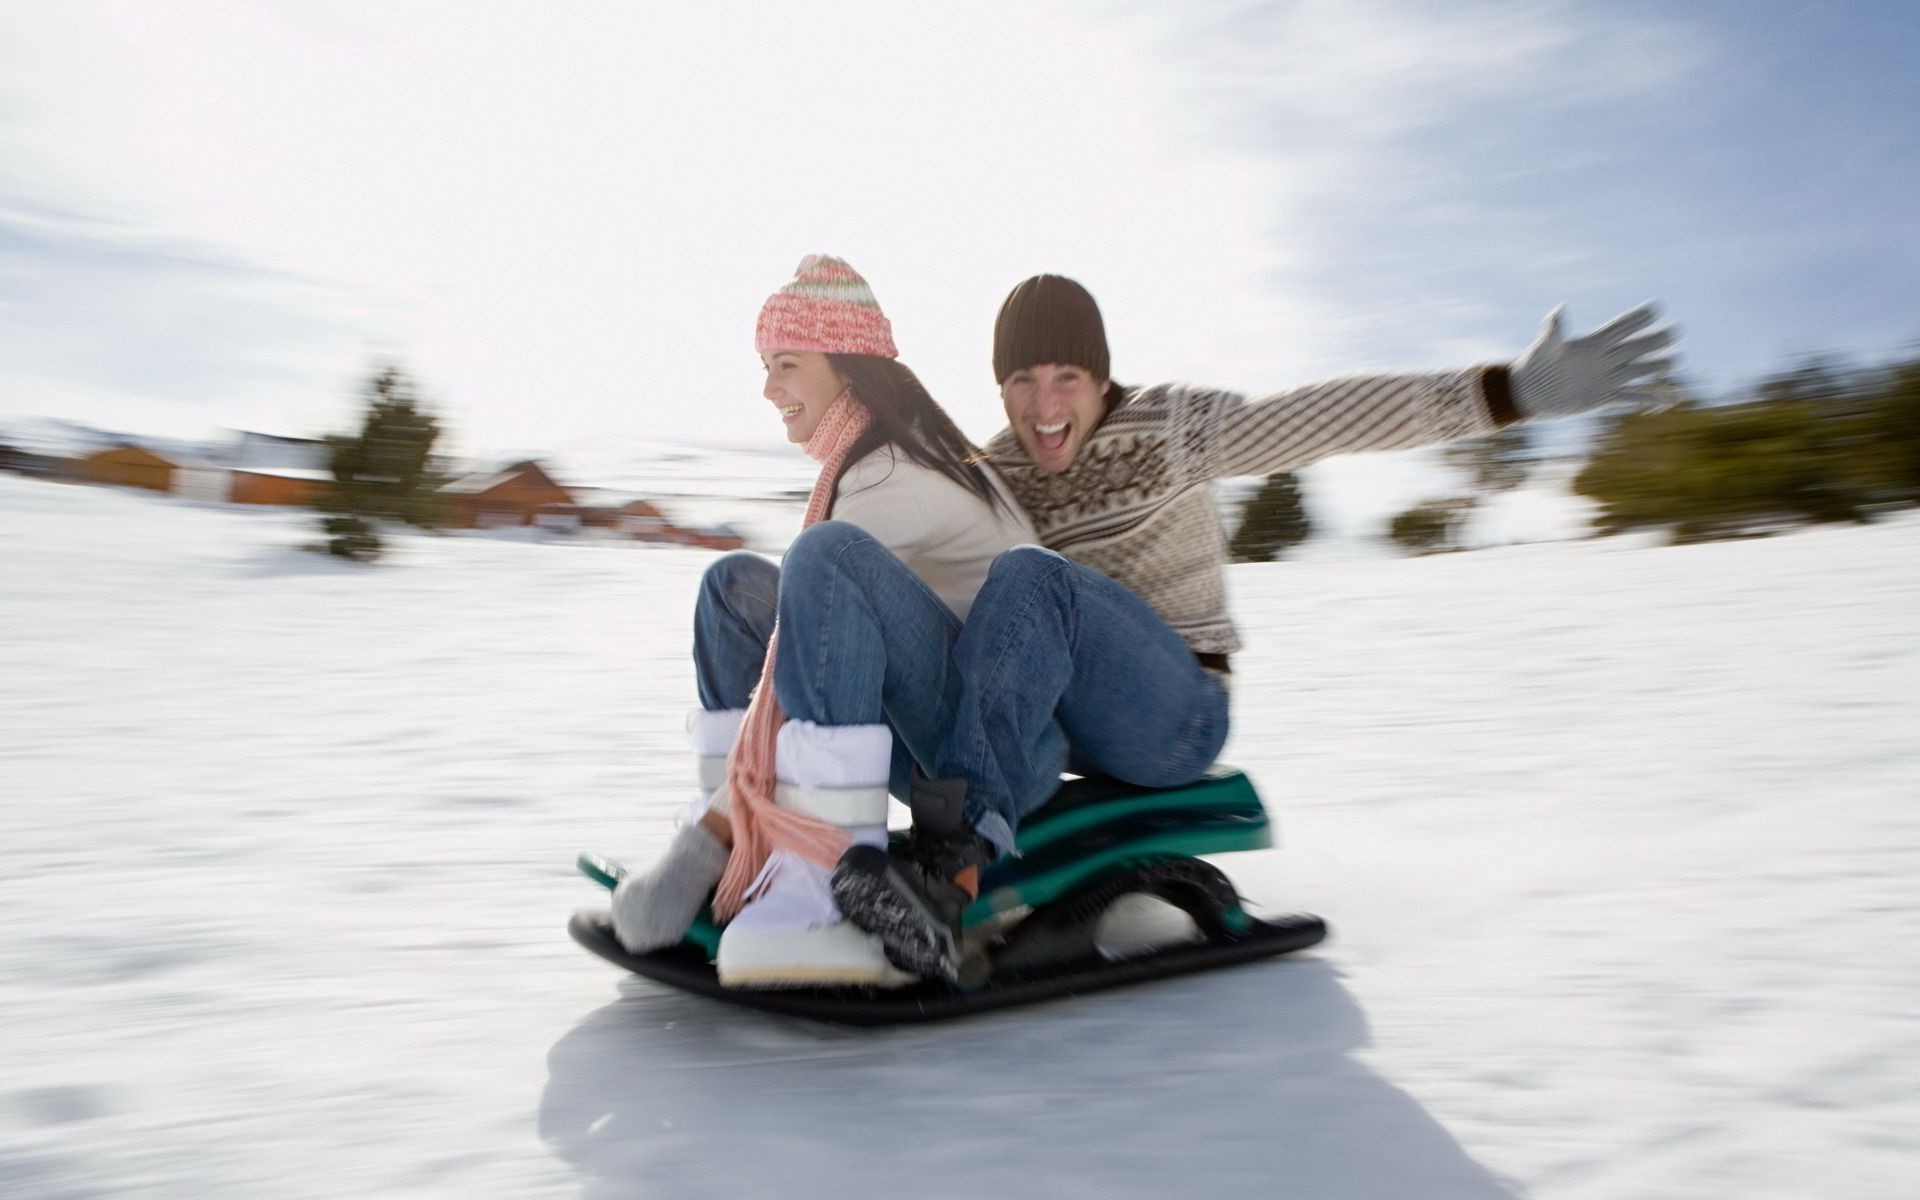 couples snow fun winter man child adult togetherness woman enjoyment two leisure love recreation girl outdoors happiness